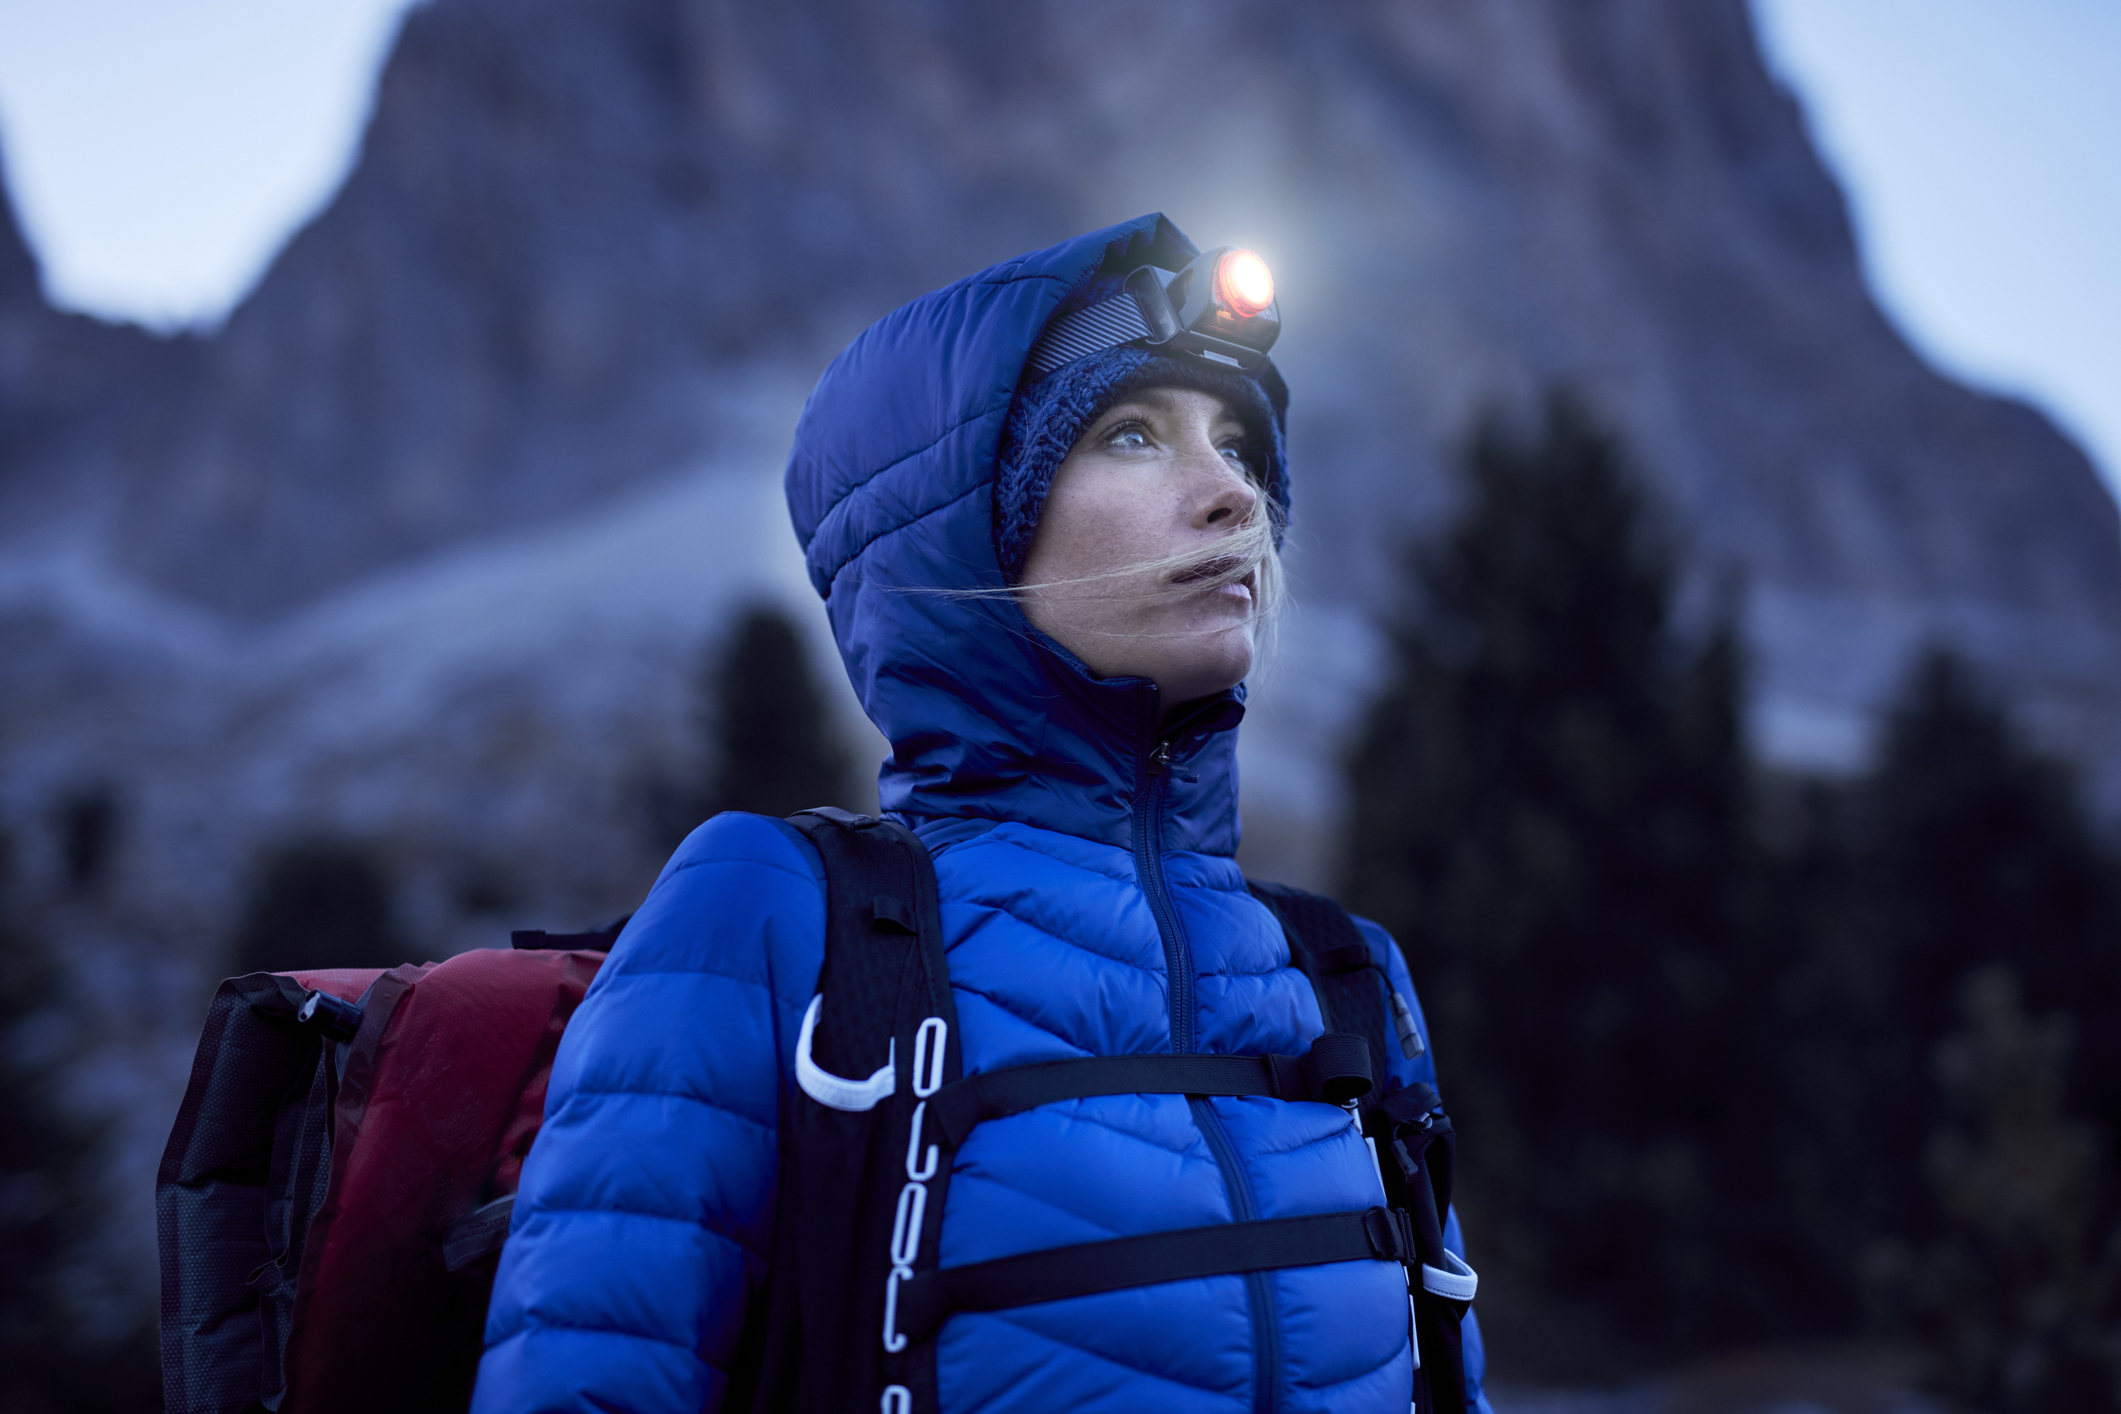 A young woman wearing a headlamp at dusk in the mountains